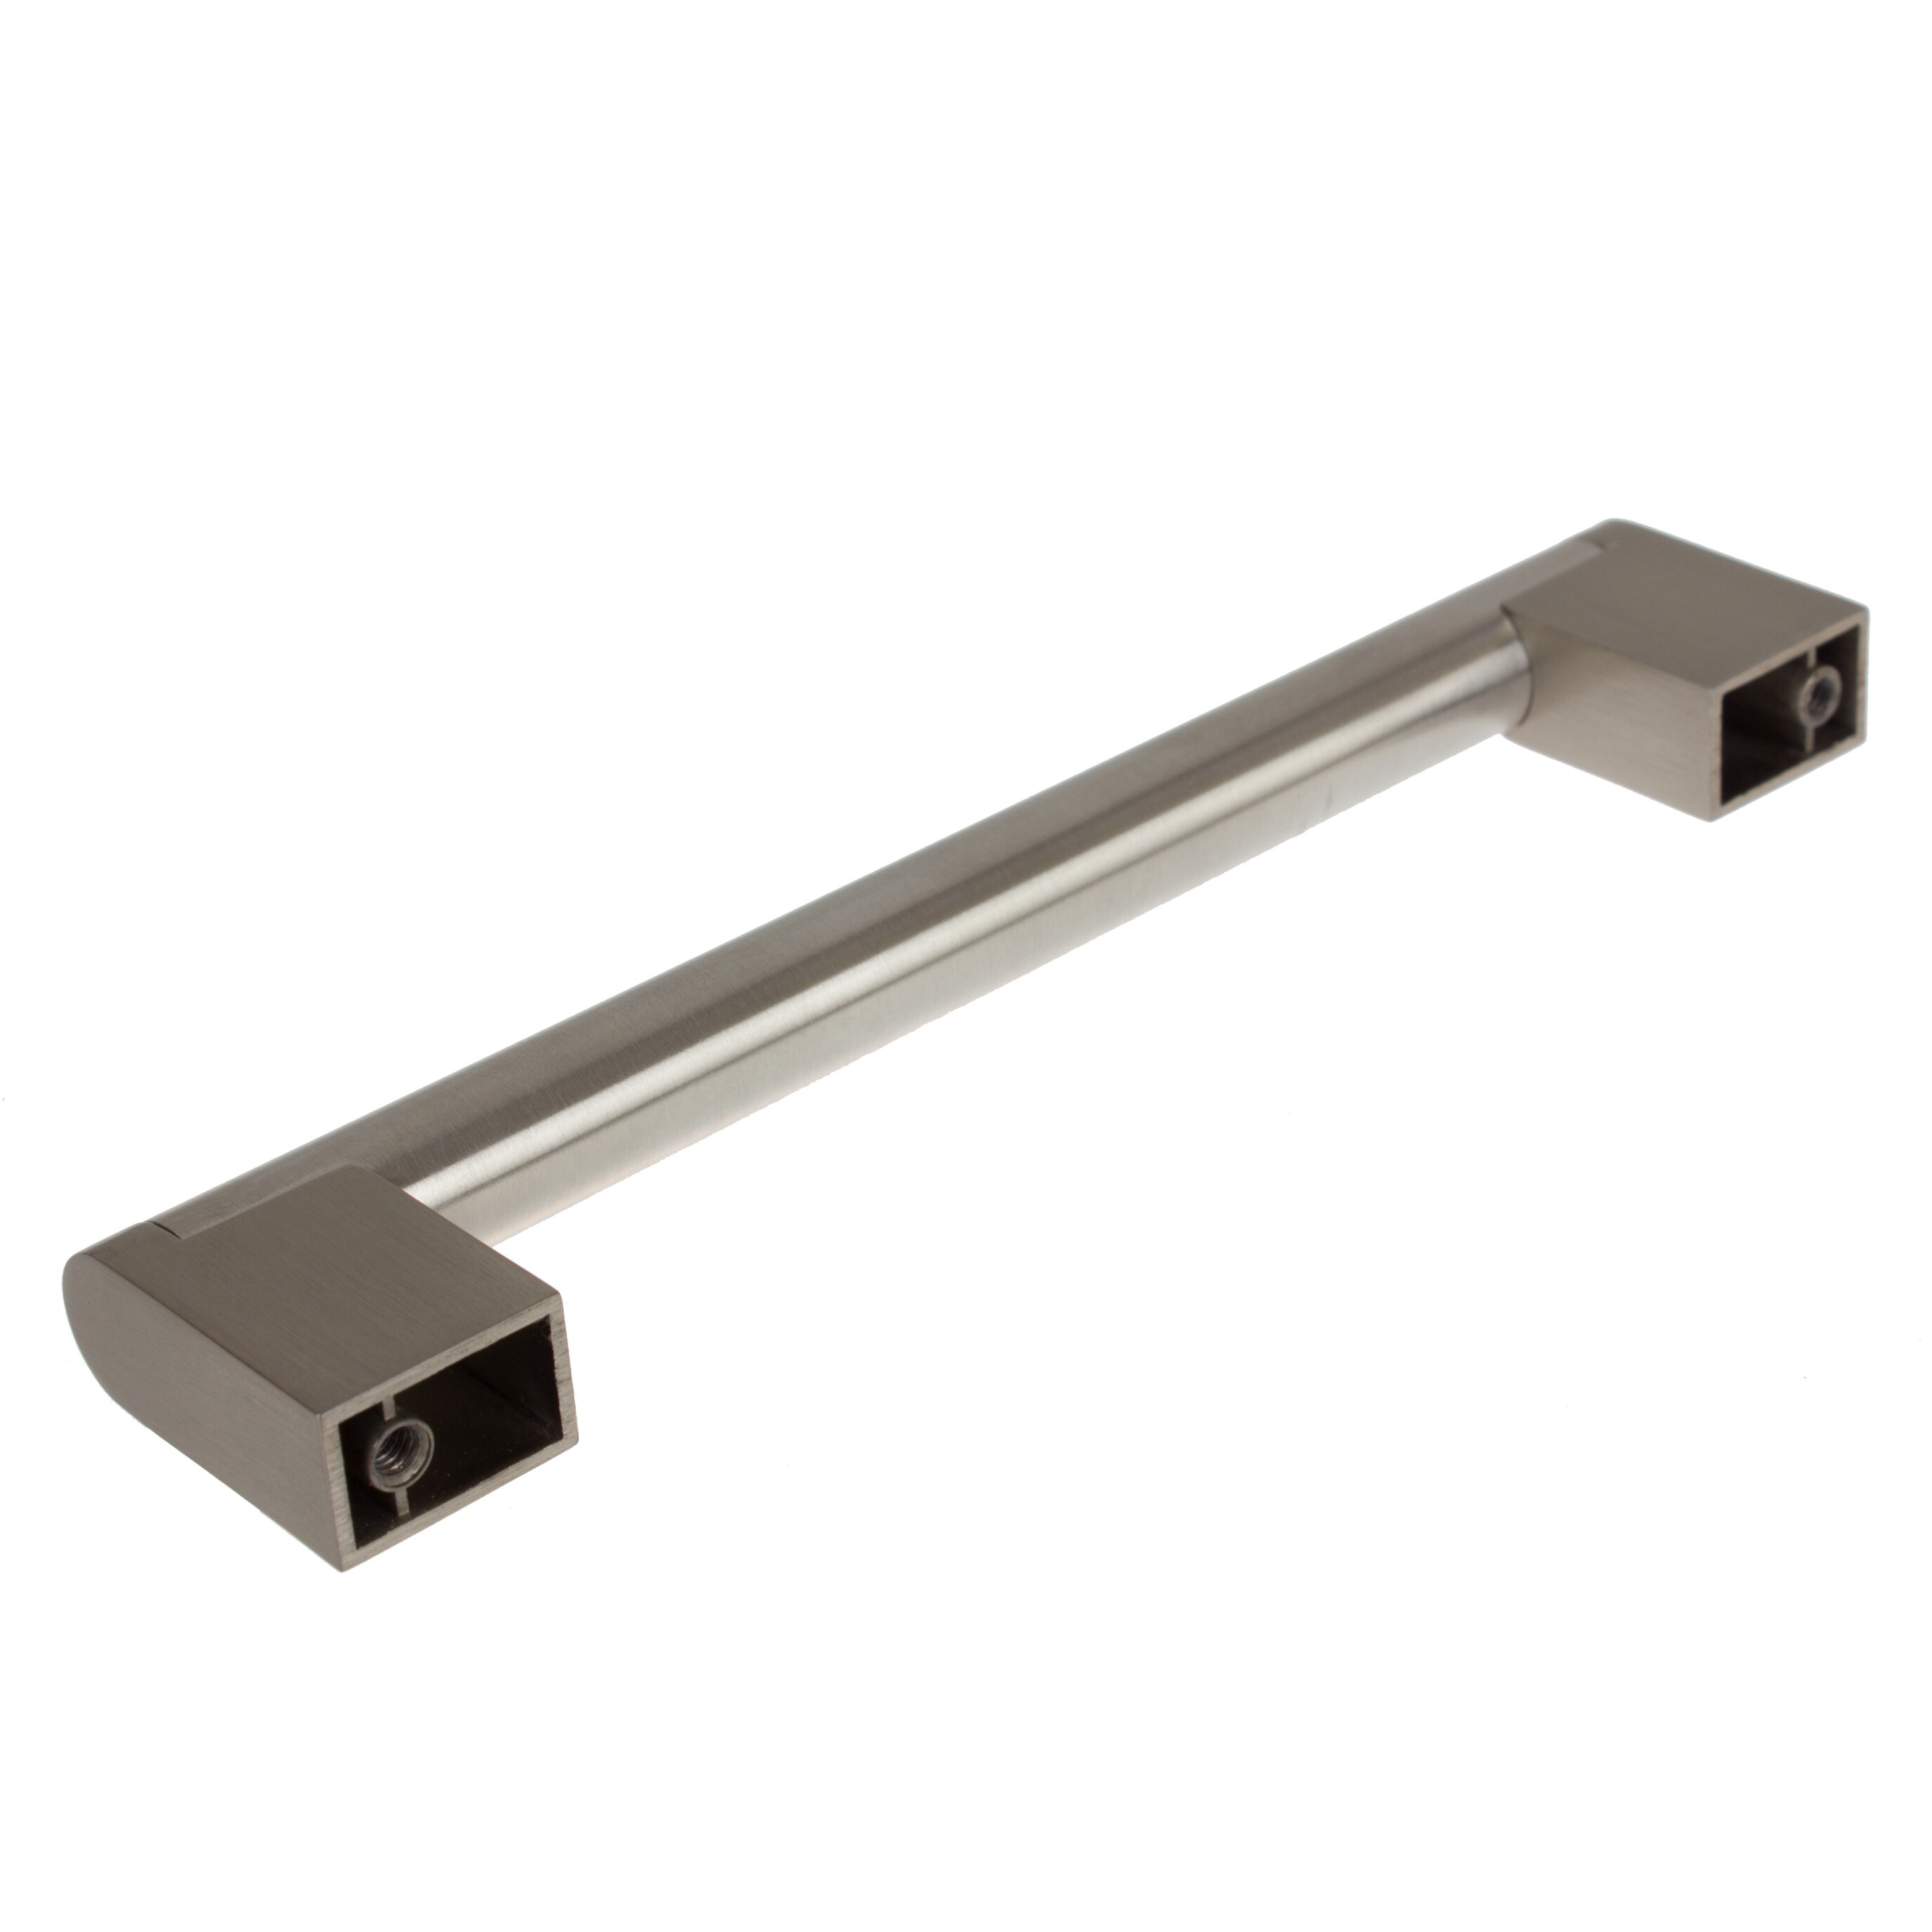 GlideRite 6-5/16 in. Center Stainless Steel Round Cross Cabinet Bar Pulls, Pack of 5 - image 3 of 5